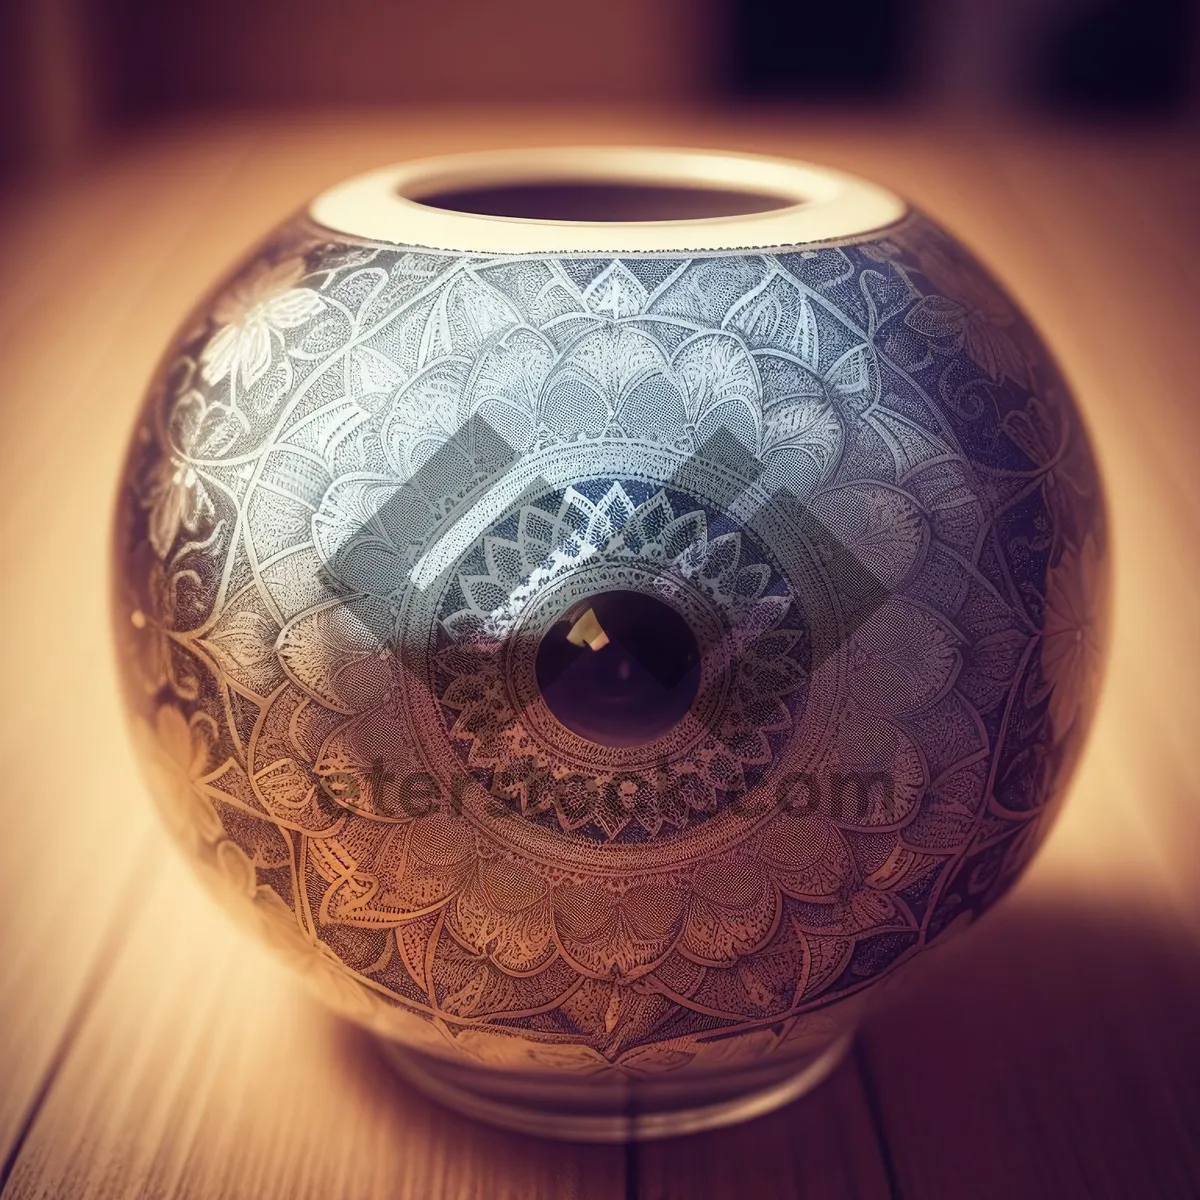 Picture of Decorative Ceramic Vessel with Ornate Ball and Bangle